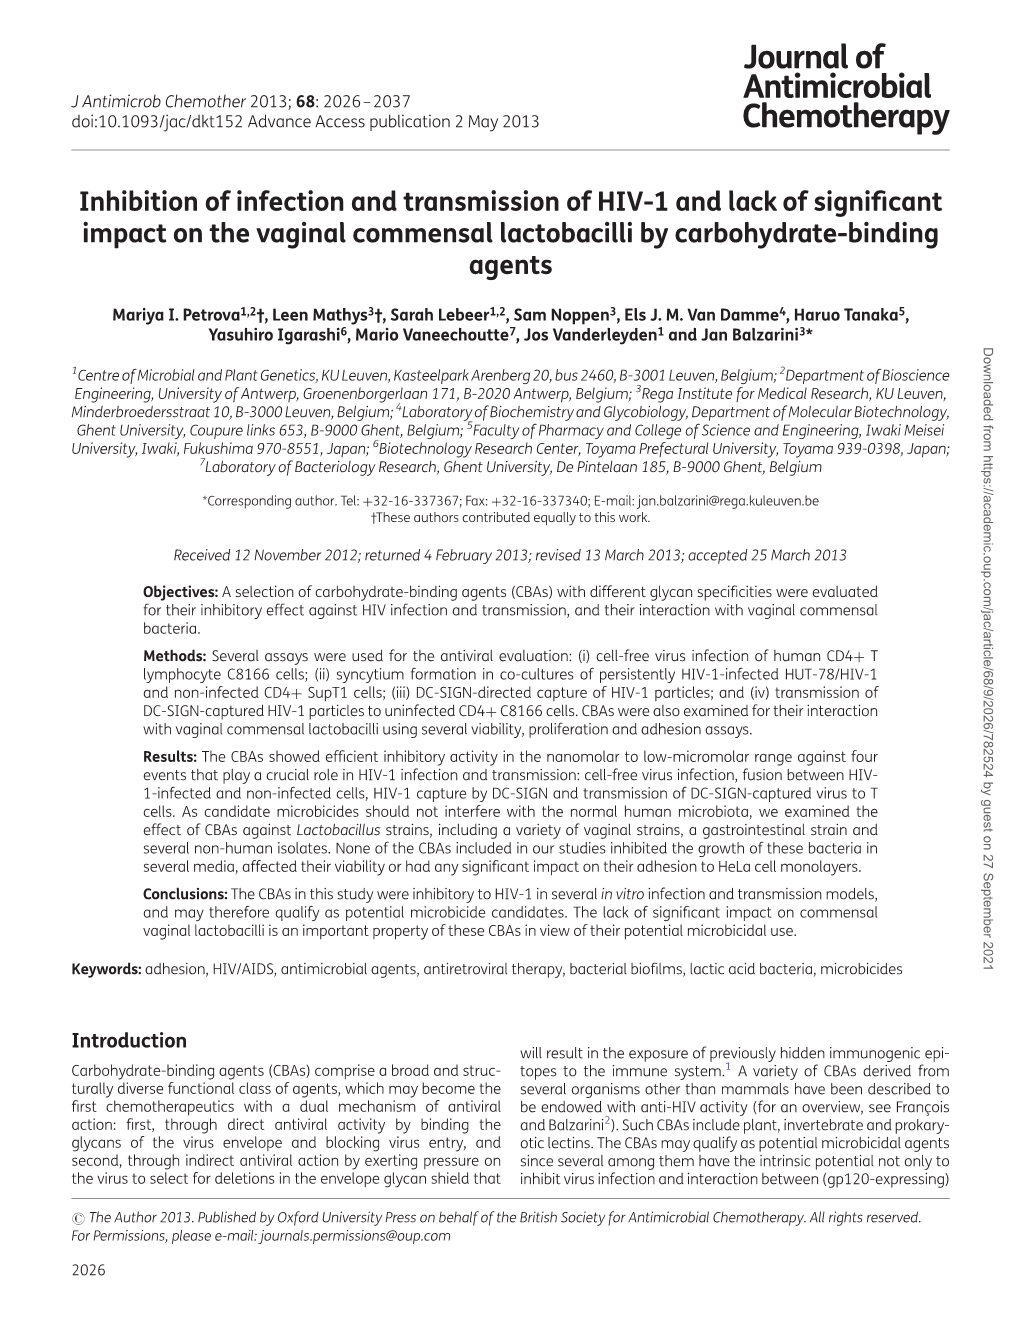 Inhibition of Infection and Transmission of HIV-1 and Lack of Significant